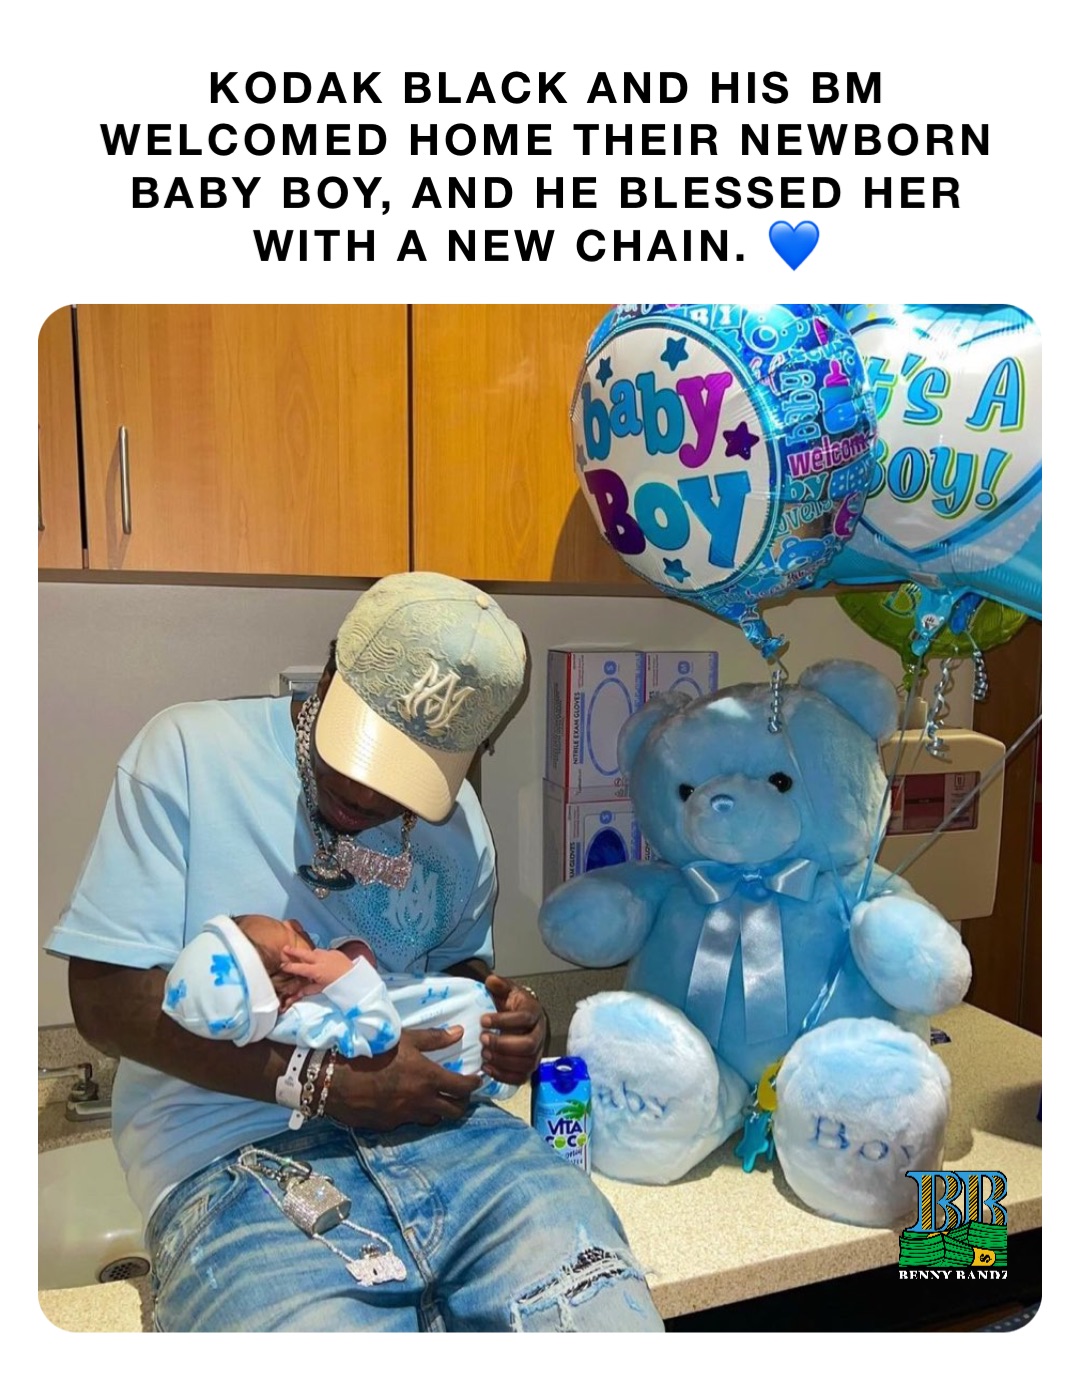 Kodak Black and his BM welcomed home their newborn baby boy, and he blessed her with a new chain. 💙